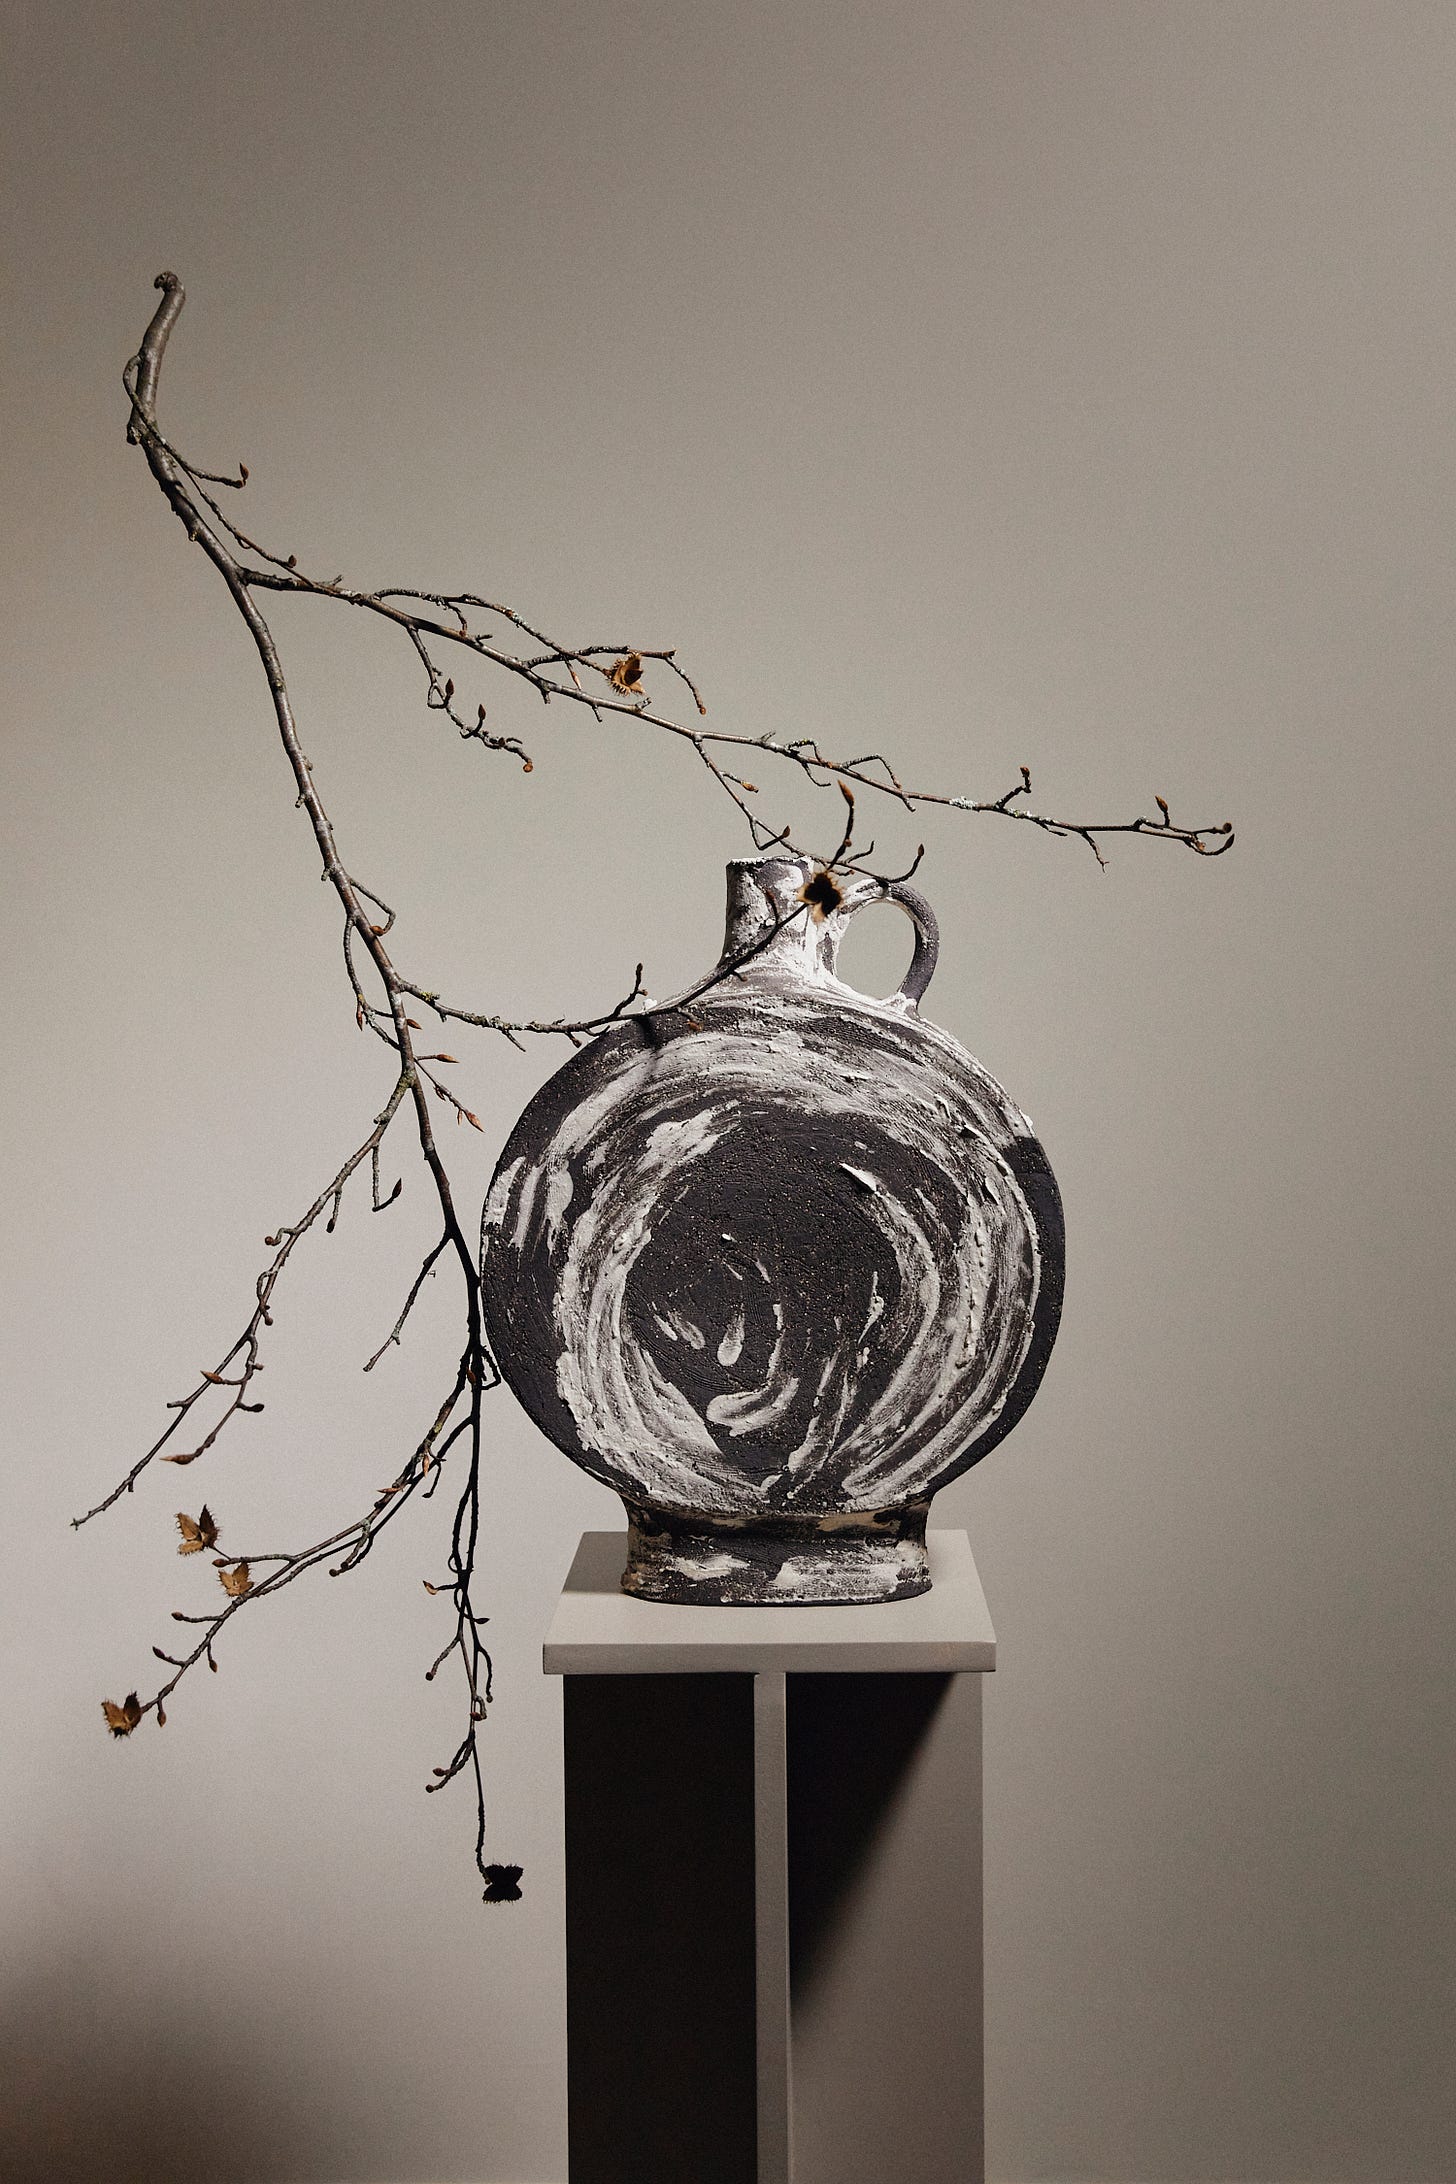 A large round vessel on a plinth with a bare branch balanced on it upside down.